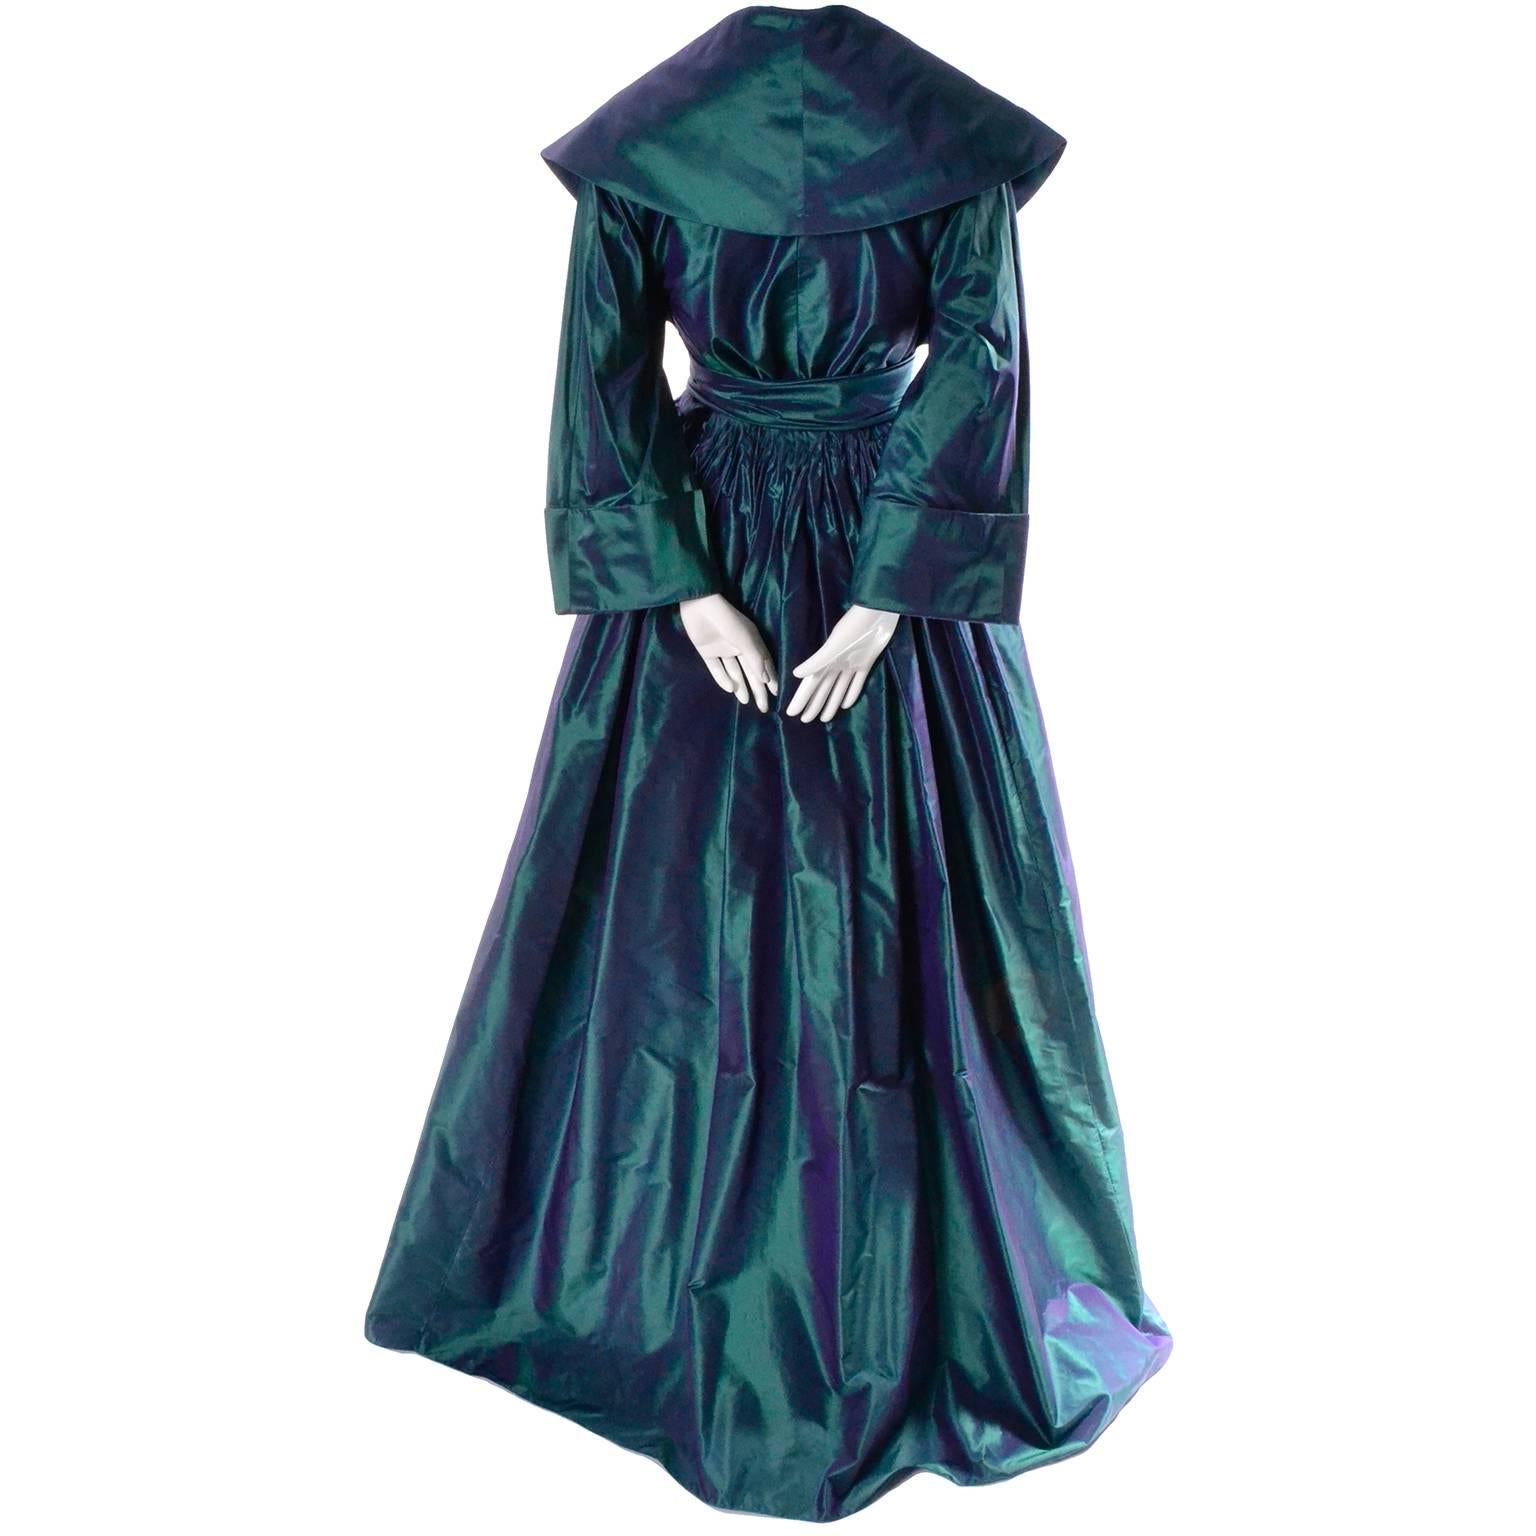 This extraordinary vintage evening gown was designed by Carolyne Roehm and purchased at Bergdorf Goodman in the 1980's.  This stunning iridescent peacock blue green dress is made of a gorgeous taffeta and it closes at the waist with a snap and hook